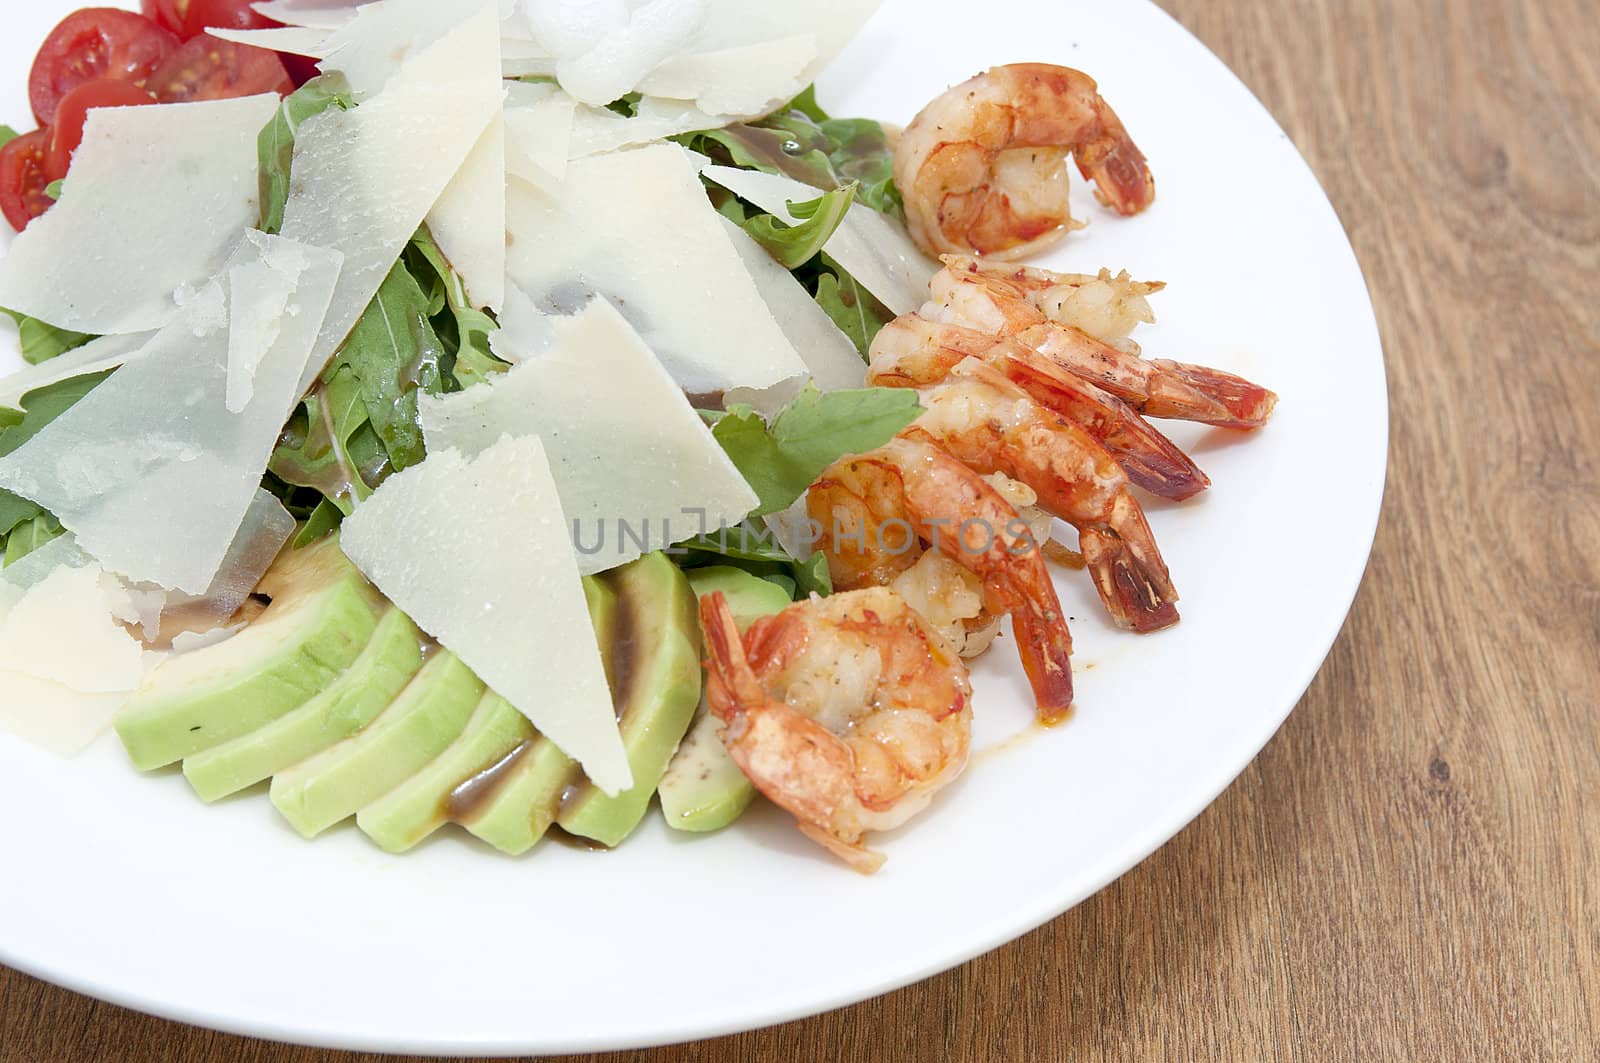 arugula dish with shrimp by Lester120